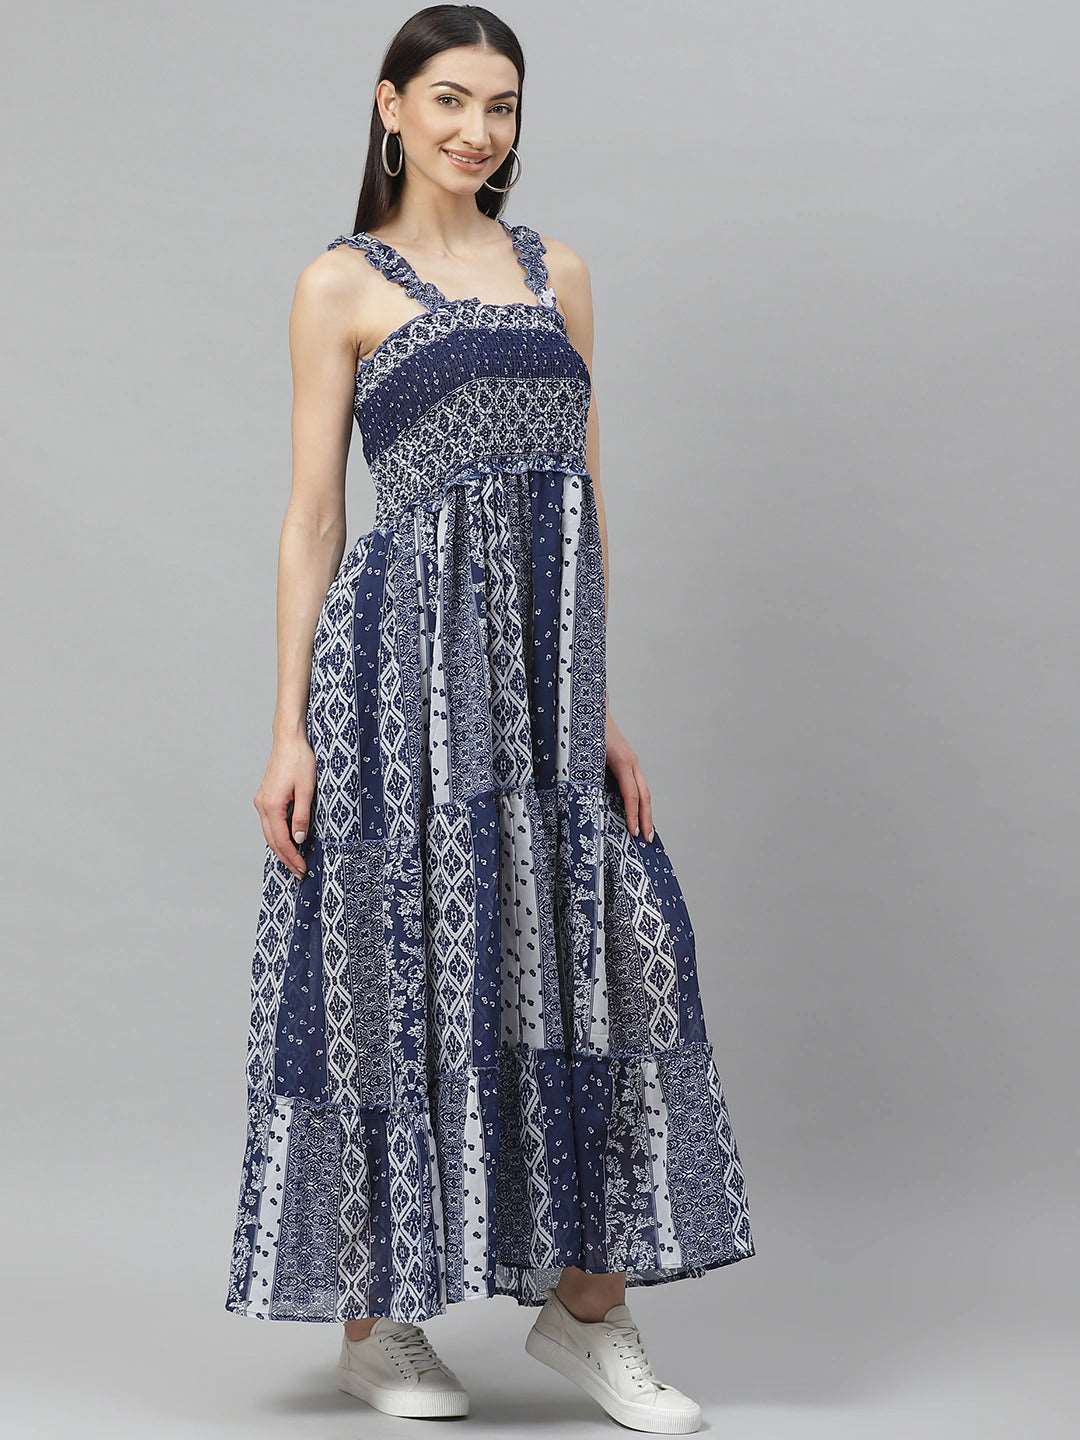 Navy Blue and White Geometric Printed Maxi Tiered Dress